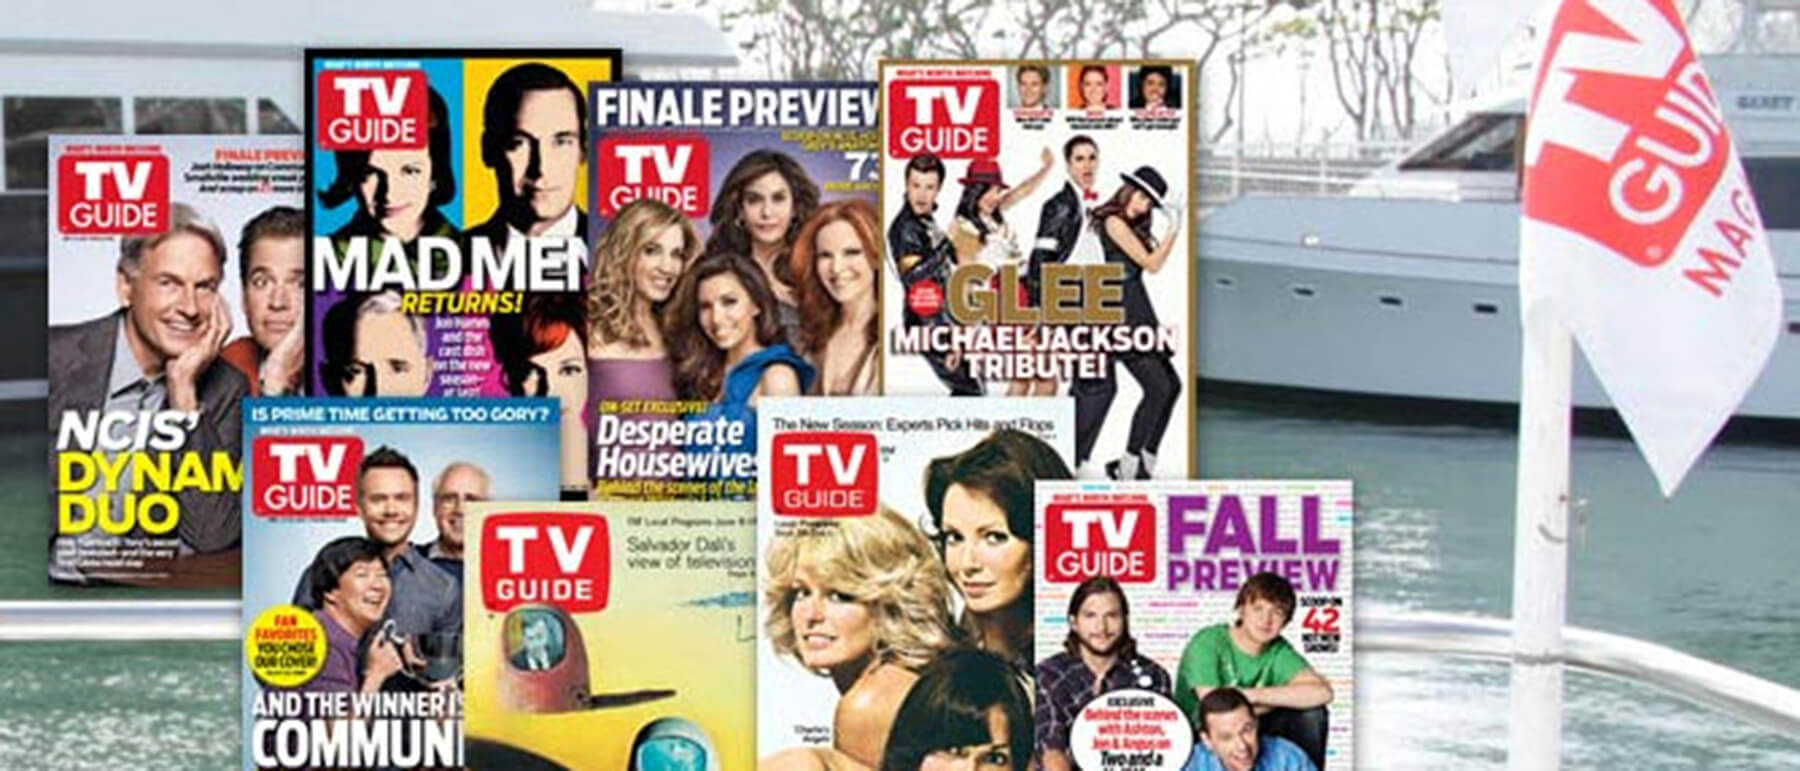 Backbone Capital Secures New Financing for TV Guide Magazine's Growth